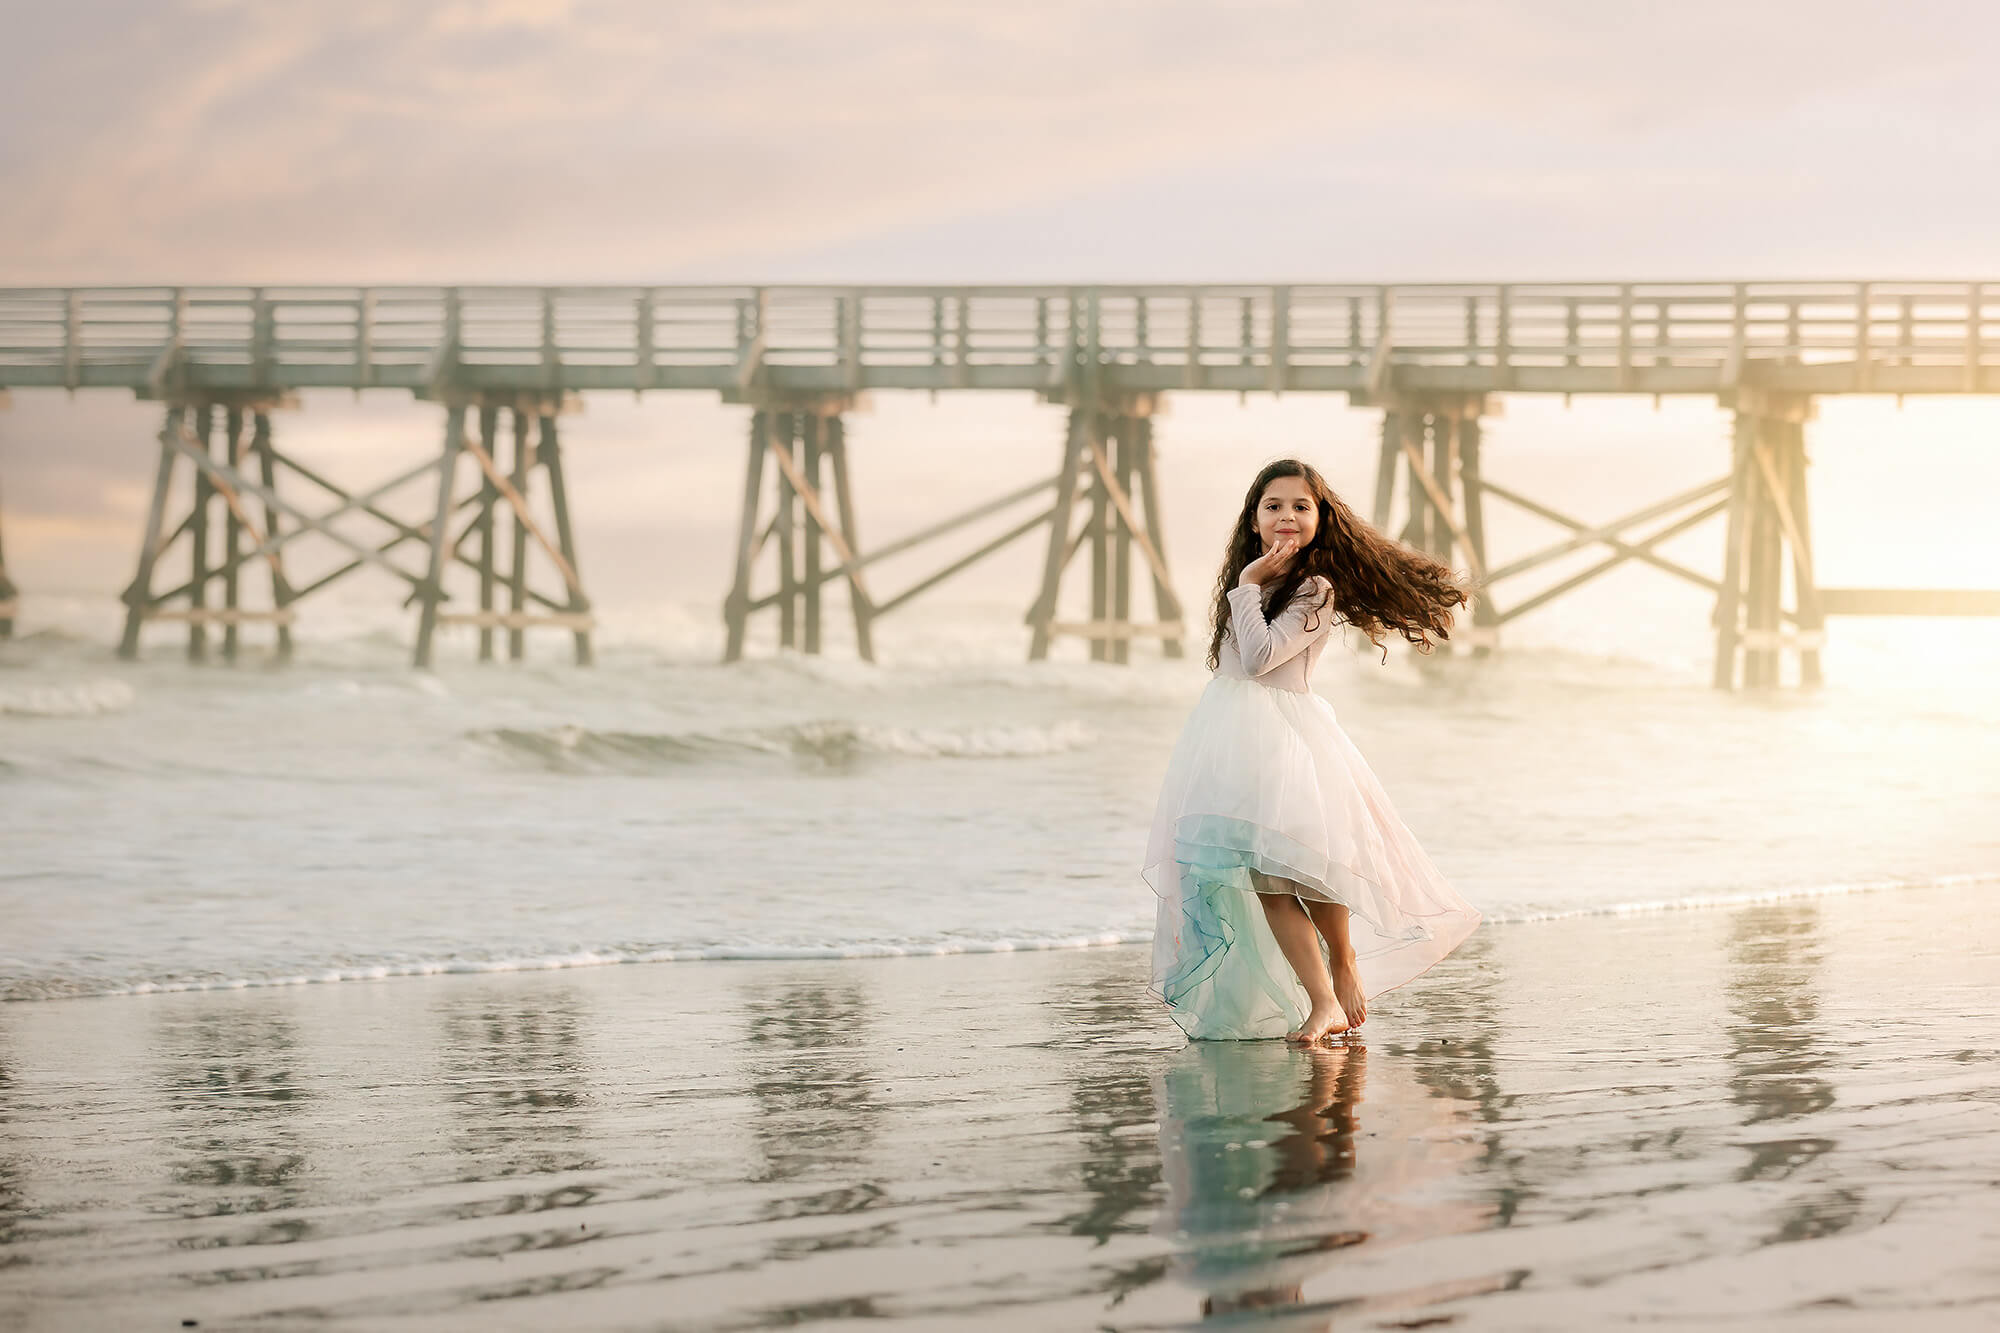 Beautiful girl twirling at the beach at golden hour edited using Kyle Goldie's presets for portraits.